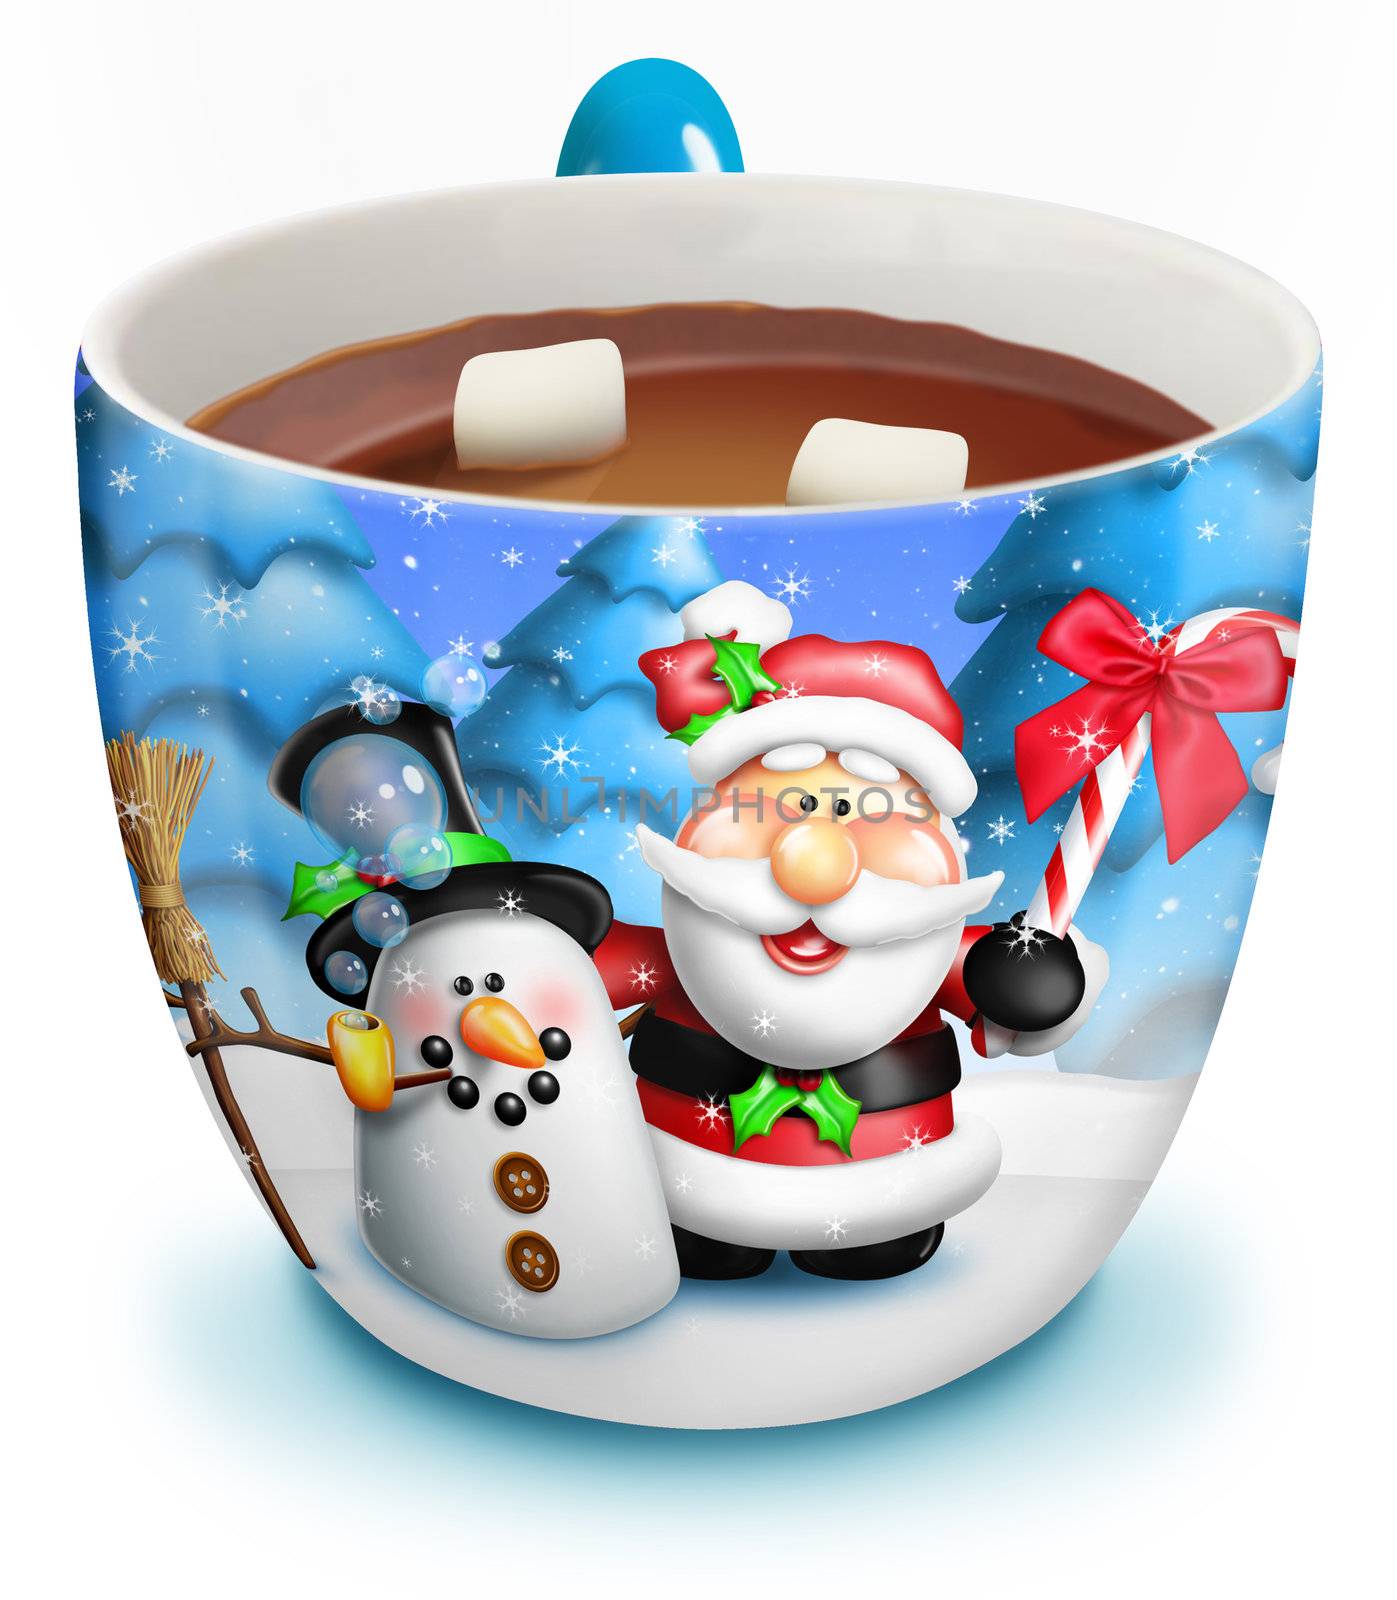 Christmas Cup of Hot Chocolate by komodoempire